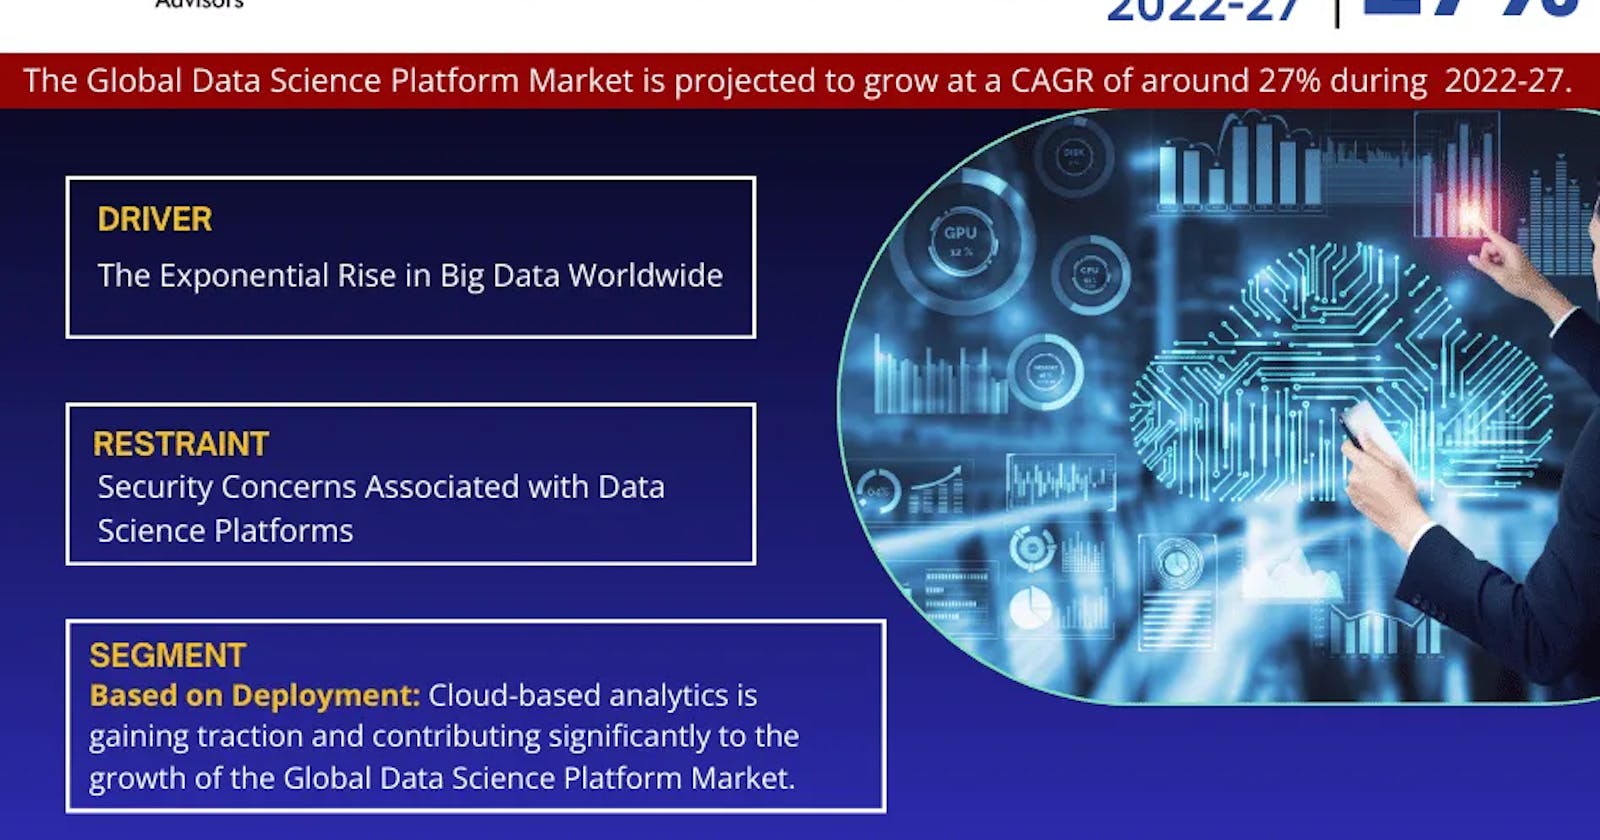 Data Science Platform Market: 27% CAGR Expected During 2022-27 Forecast Period